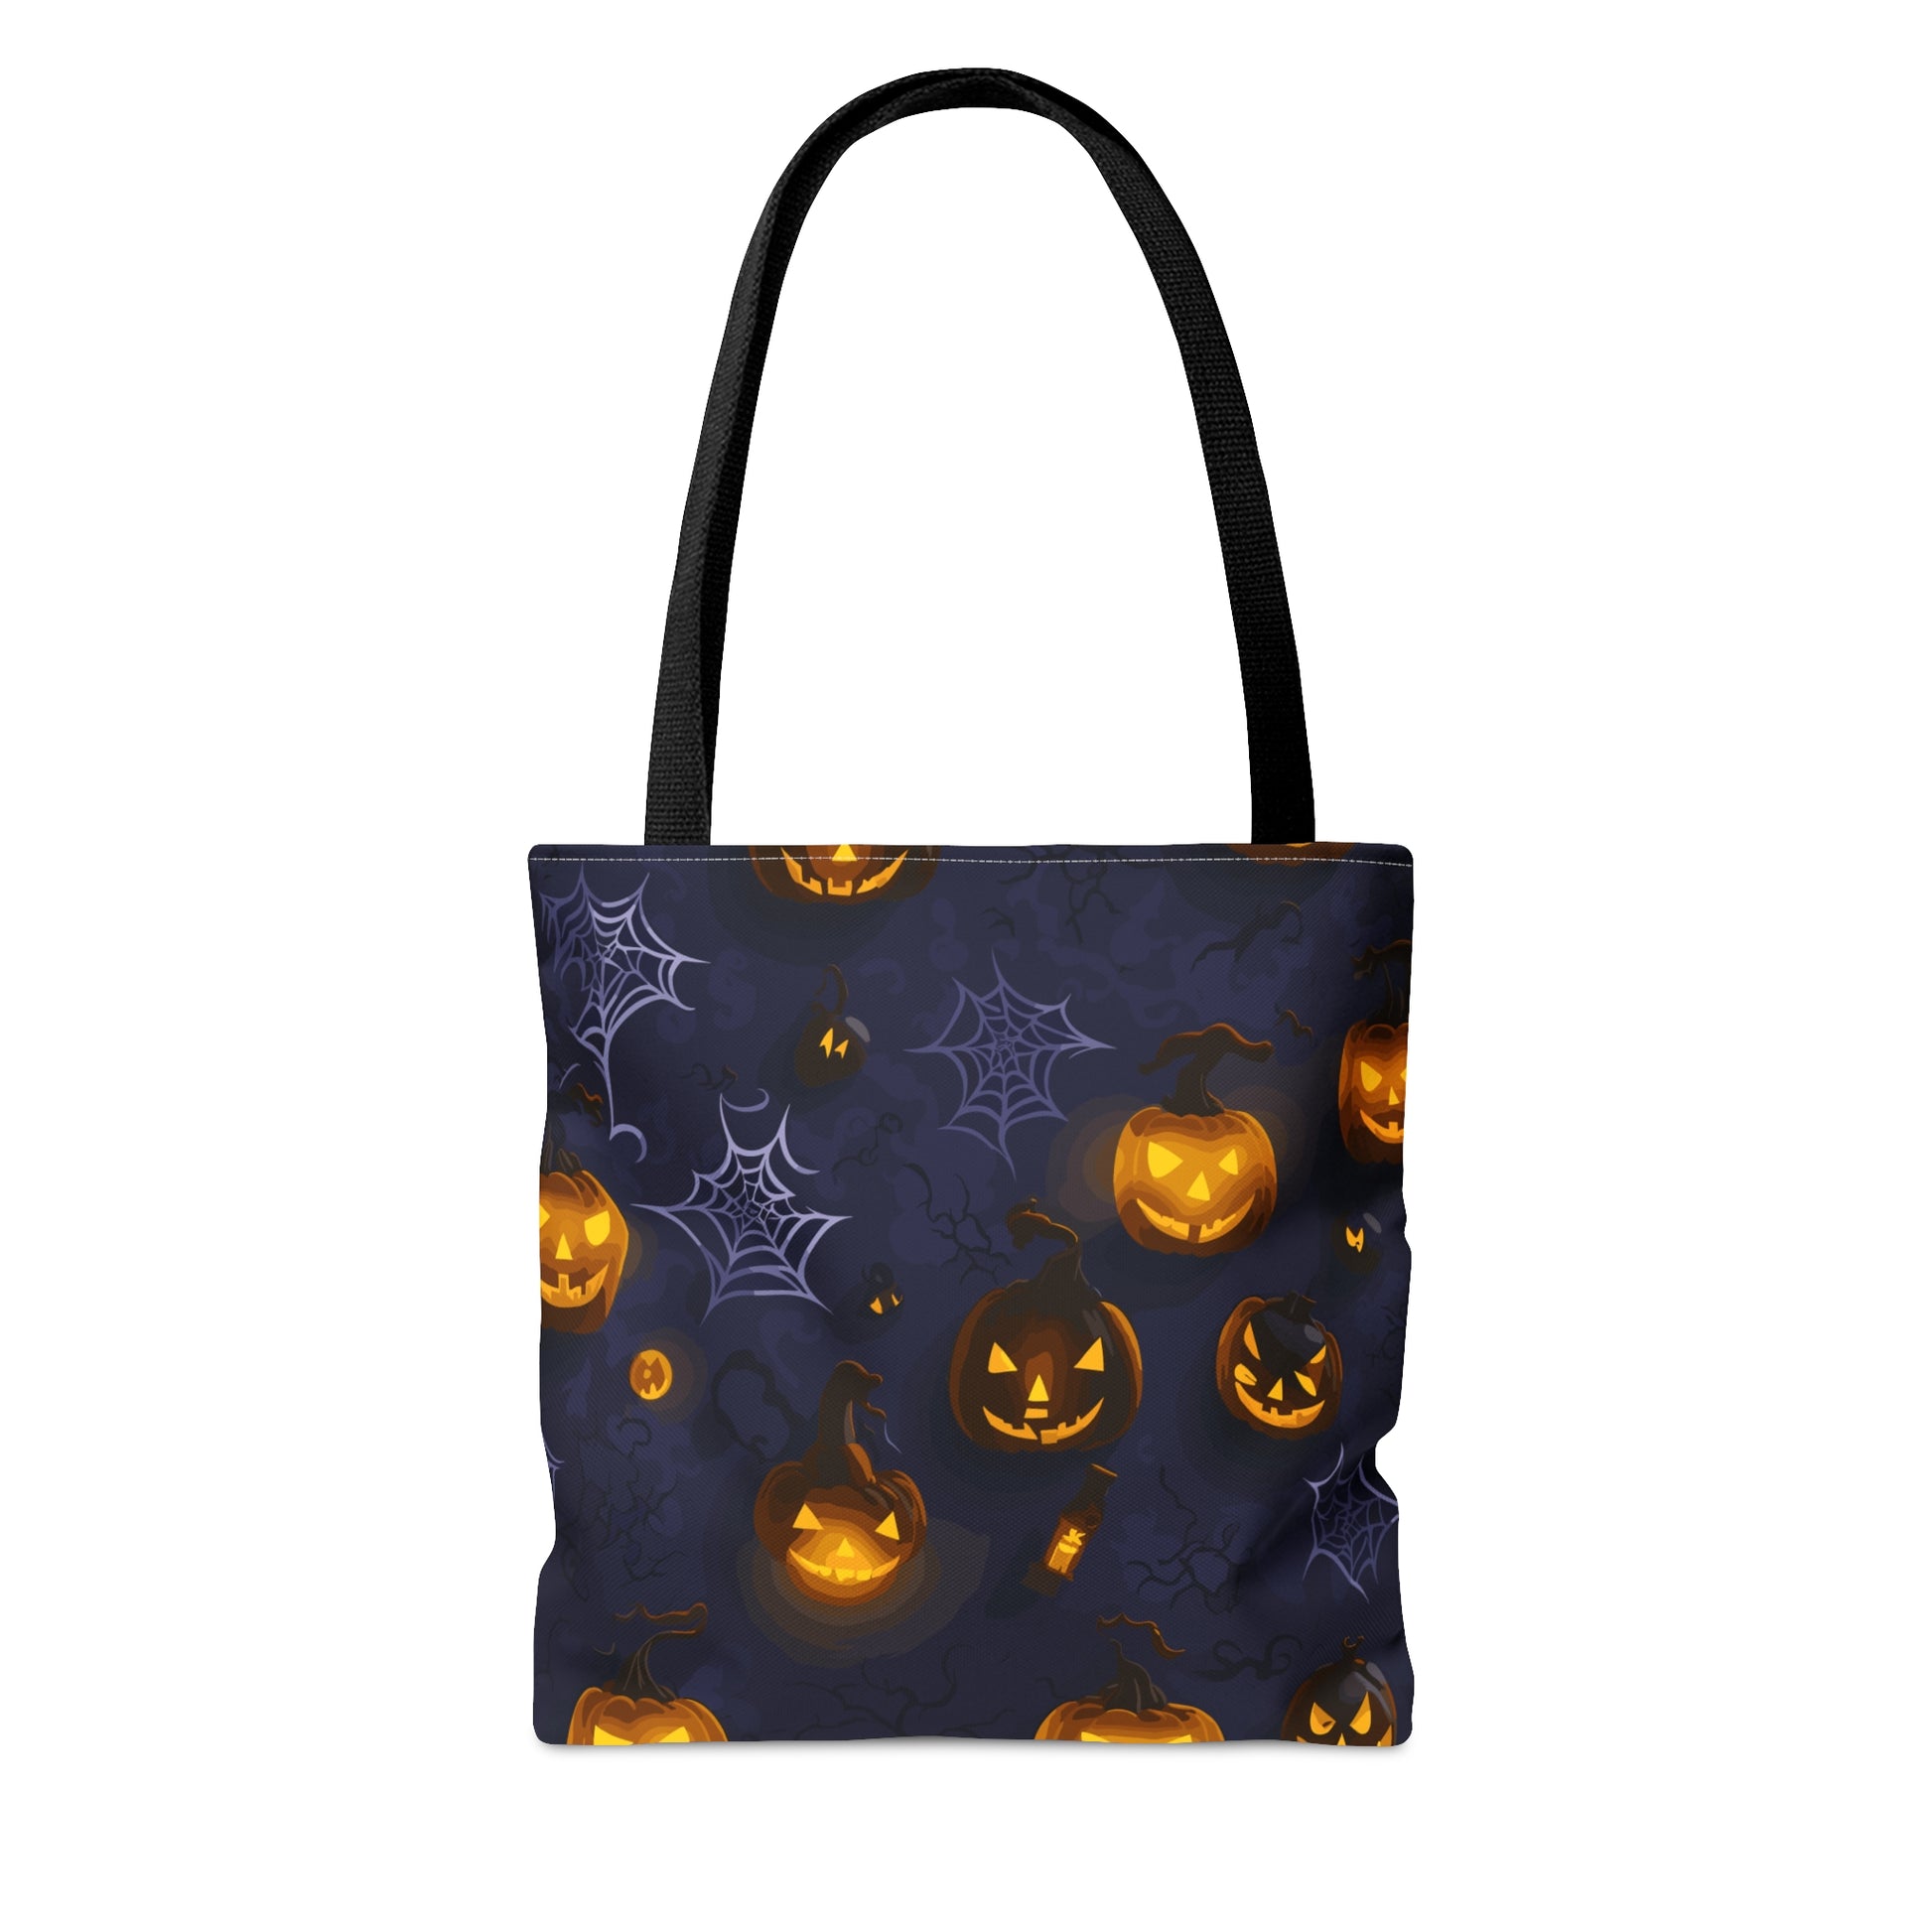 Halloween Hauler Tote Bag from Fierce Fusion